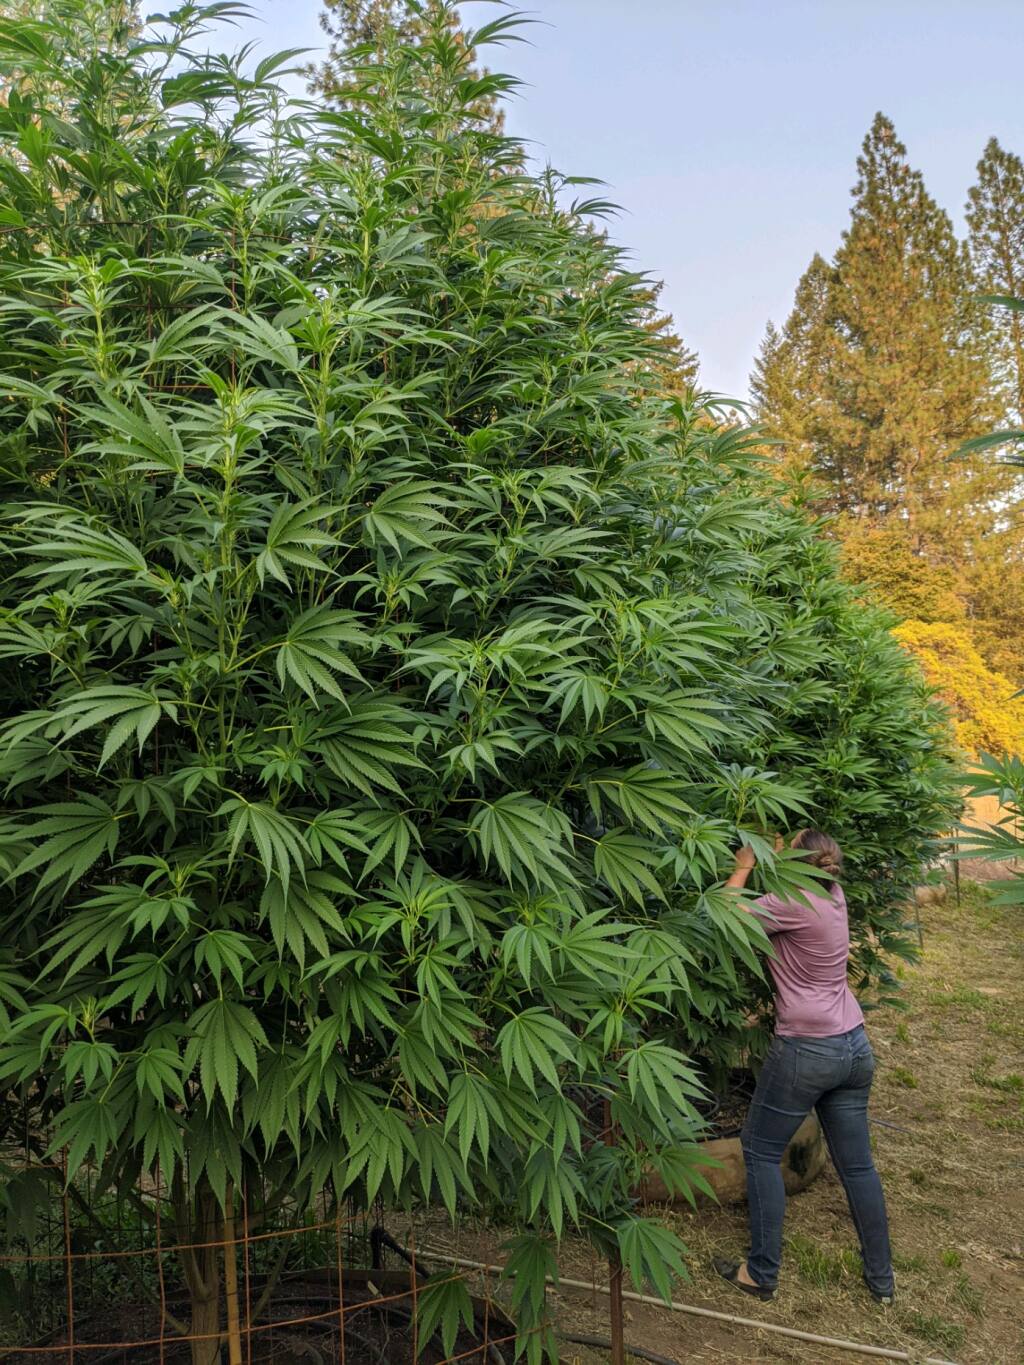 Casey Vaughn of Woodman Peak Farm leans into her tree-tall cannabis plants on the 840-acre farm in Mendocino County. (Chris Vaughn photo)